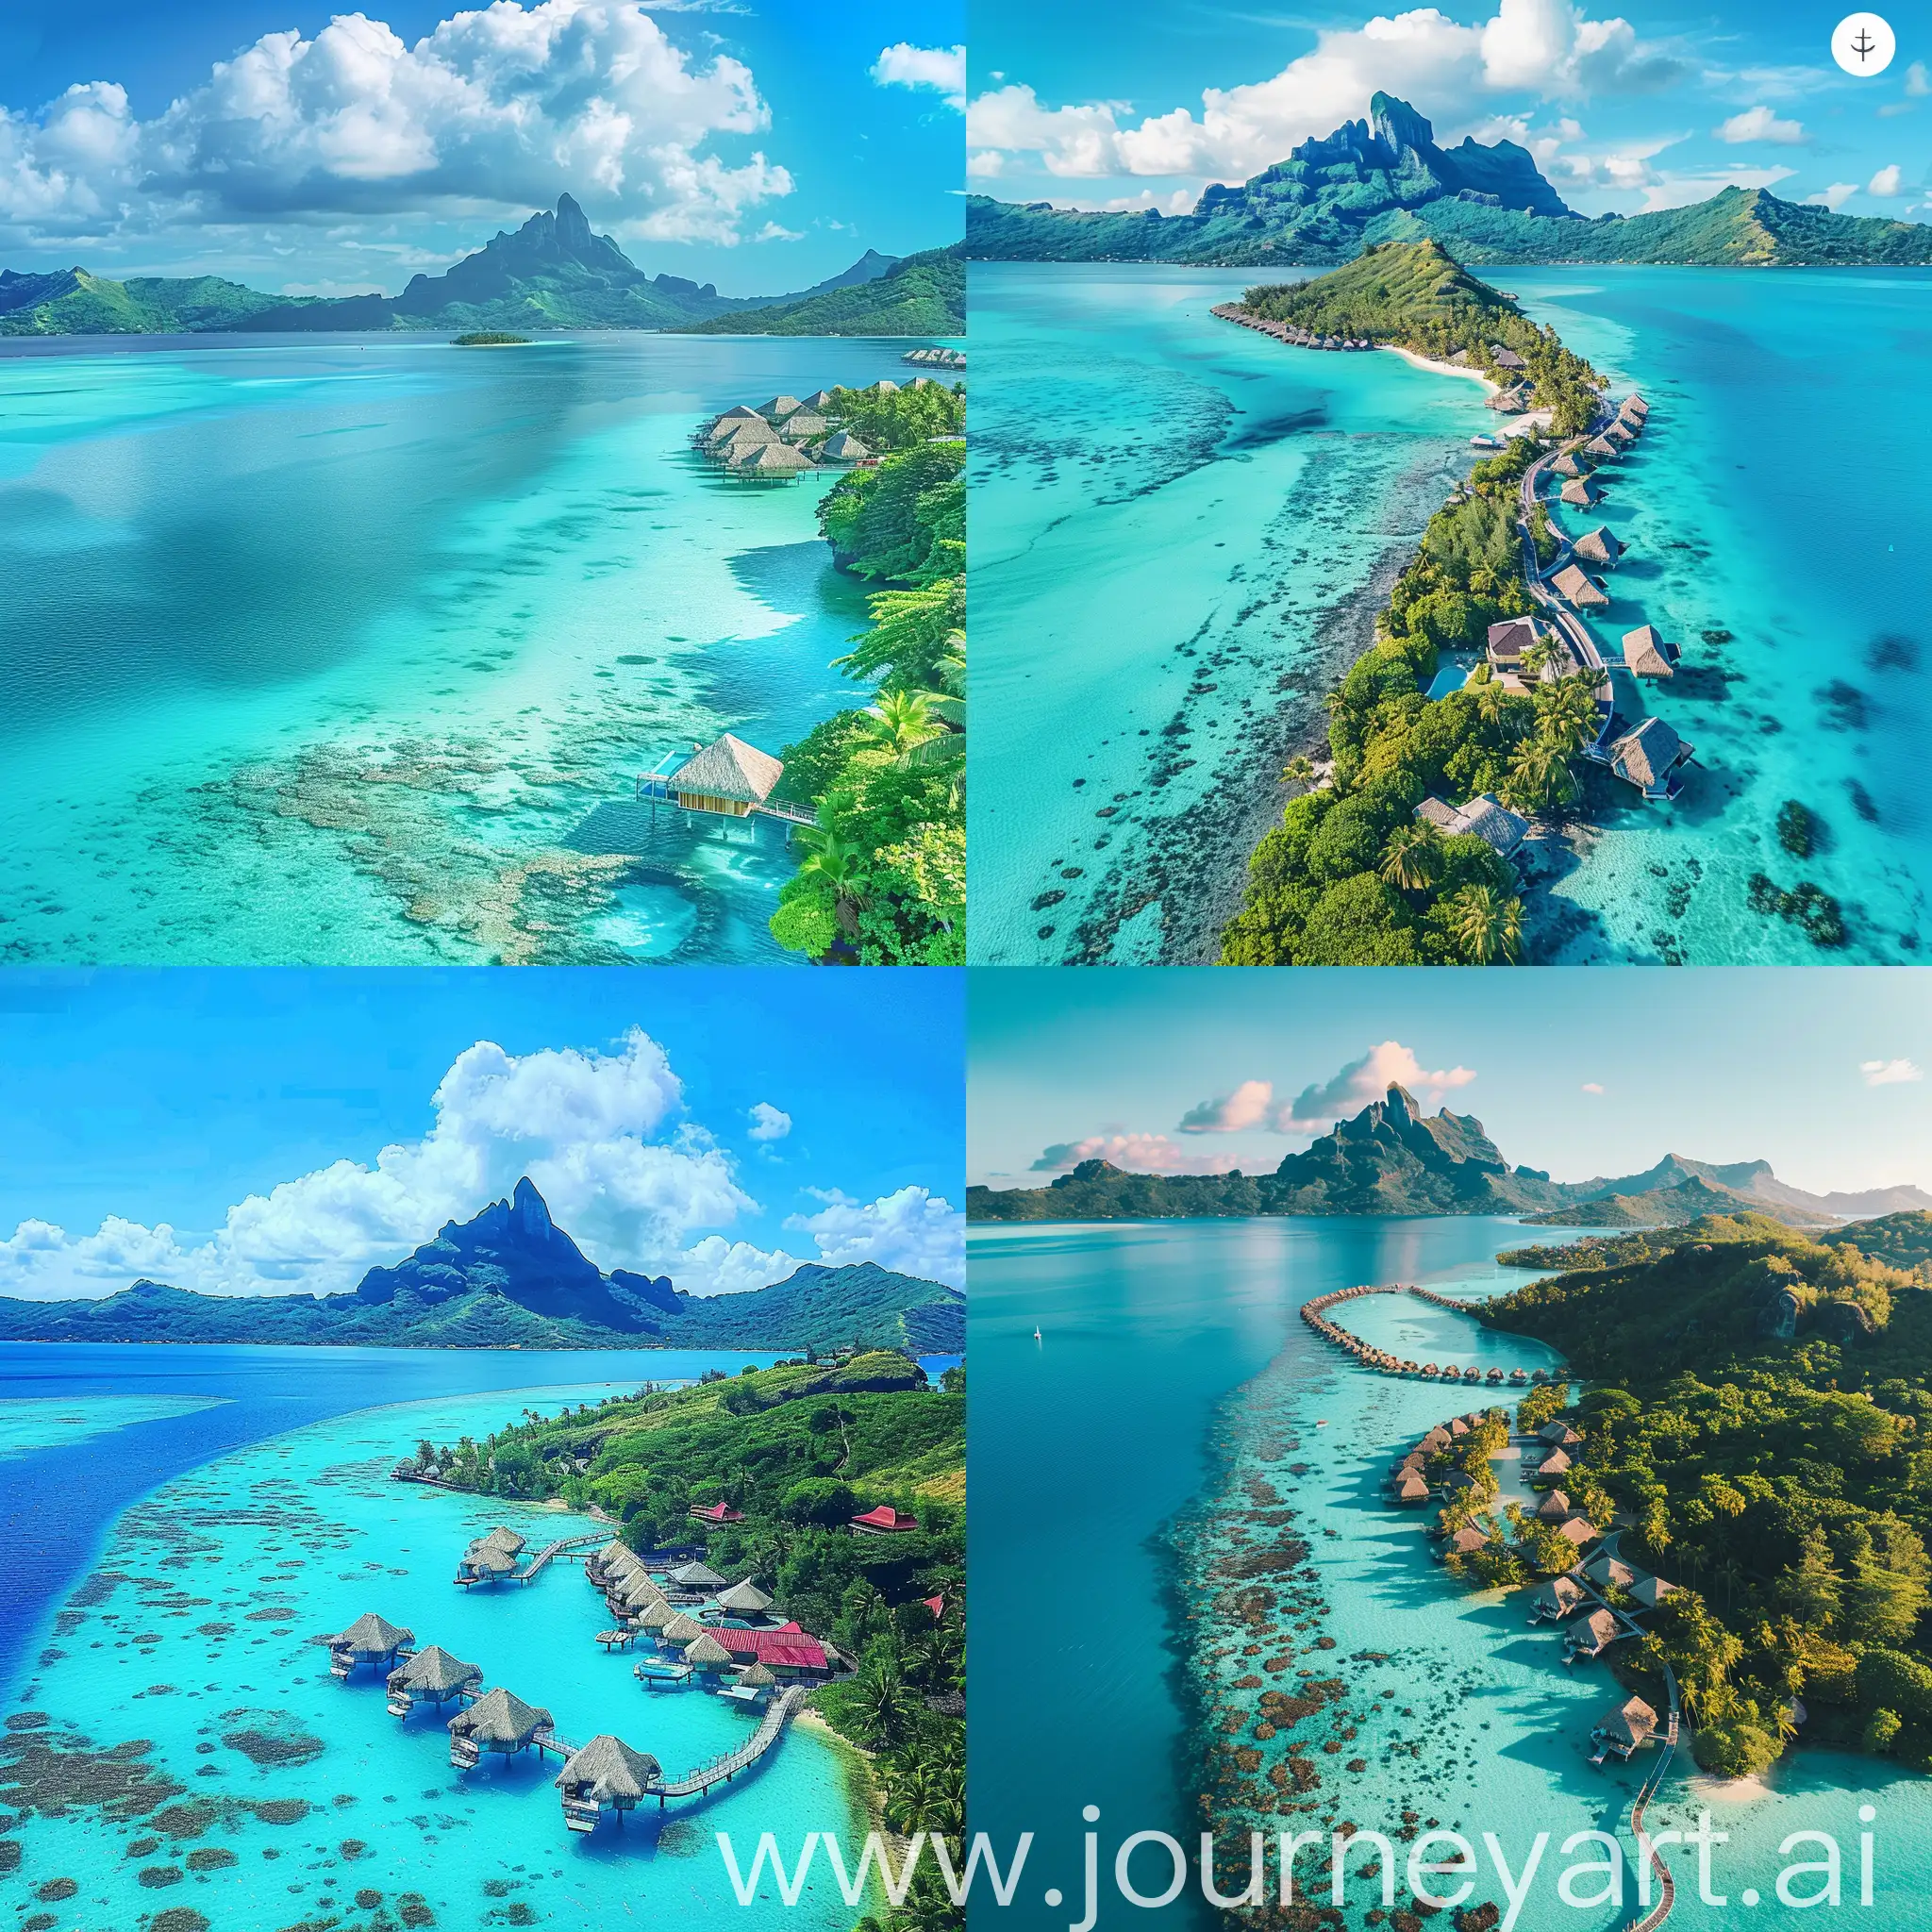 The serene beauty of Bora Bora, nestled in the heart of French Polynesia, where the crystal-clear turquoise waters meet the lush greenery of the surrounding isles. This paradise on earth is captured in a moment of tranquility, with the iconic overwater bungalows dotting the shoreline and Mount Otemanu rising majestically in the background, in high quality flat style